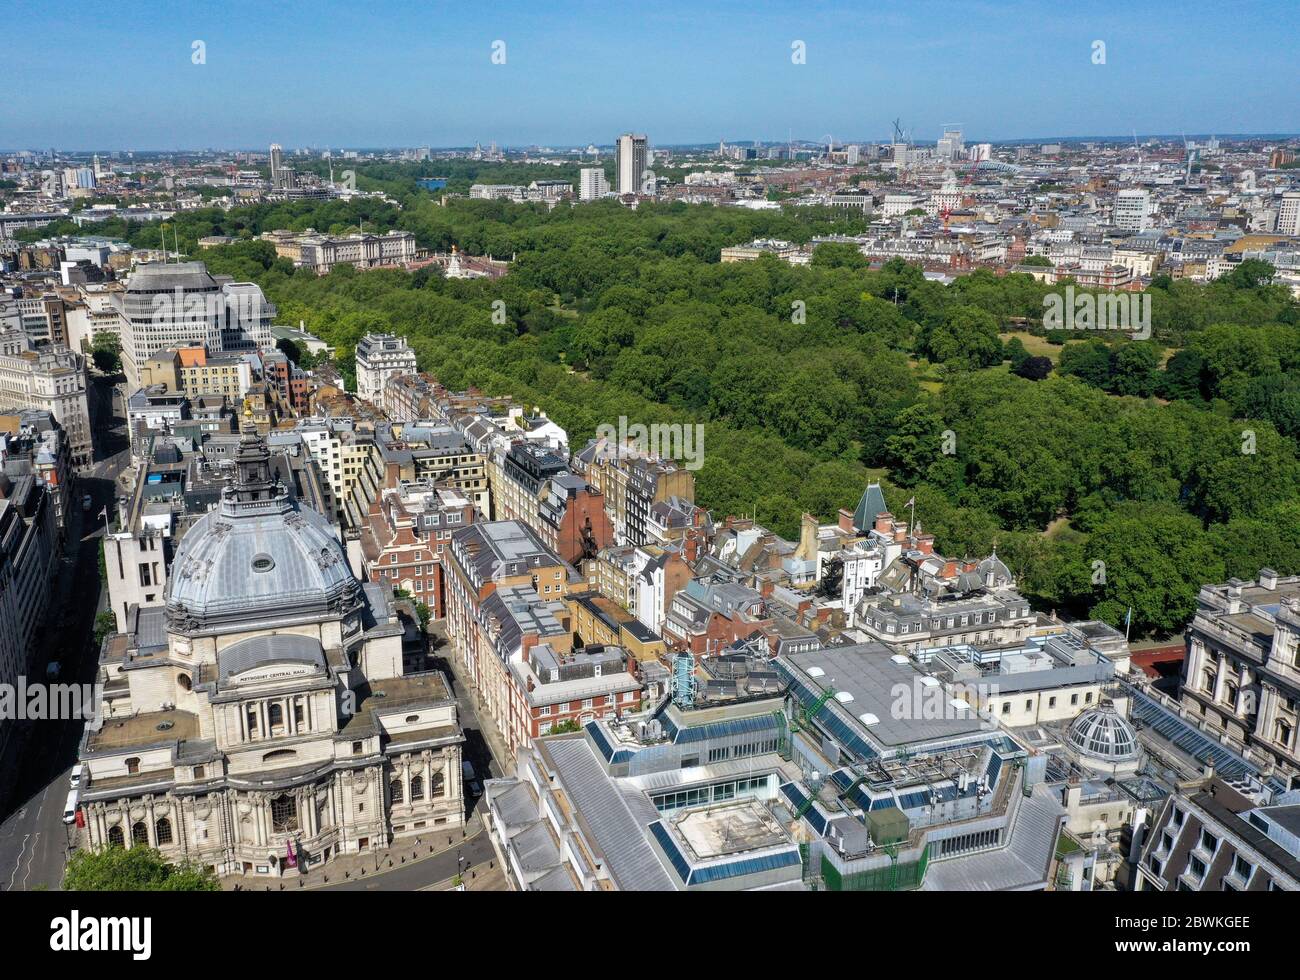 An aerial view of London showing Buckingham Palace and St James's Park, the Ministry of Justice on Tothill Street, Methodist Central Hall and Matthew Parker Street (bottom left) and the Queen Elizabeth II Centre (bottom right). Stock Photo